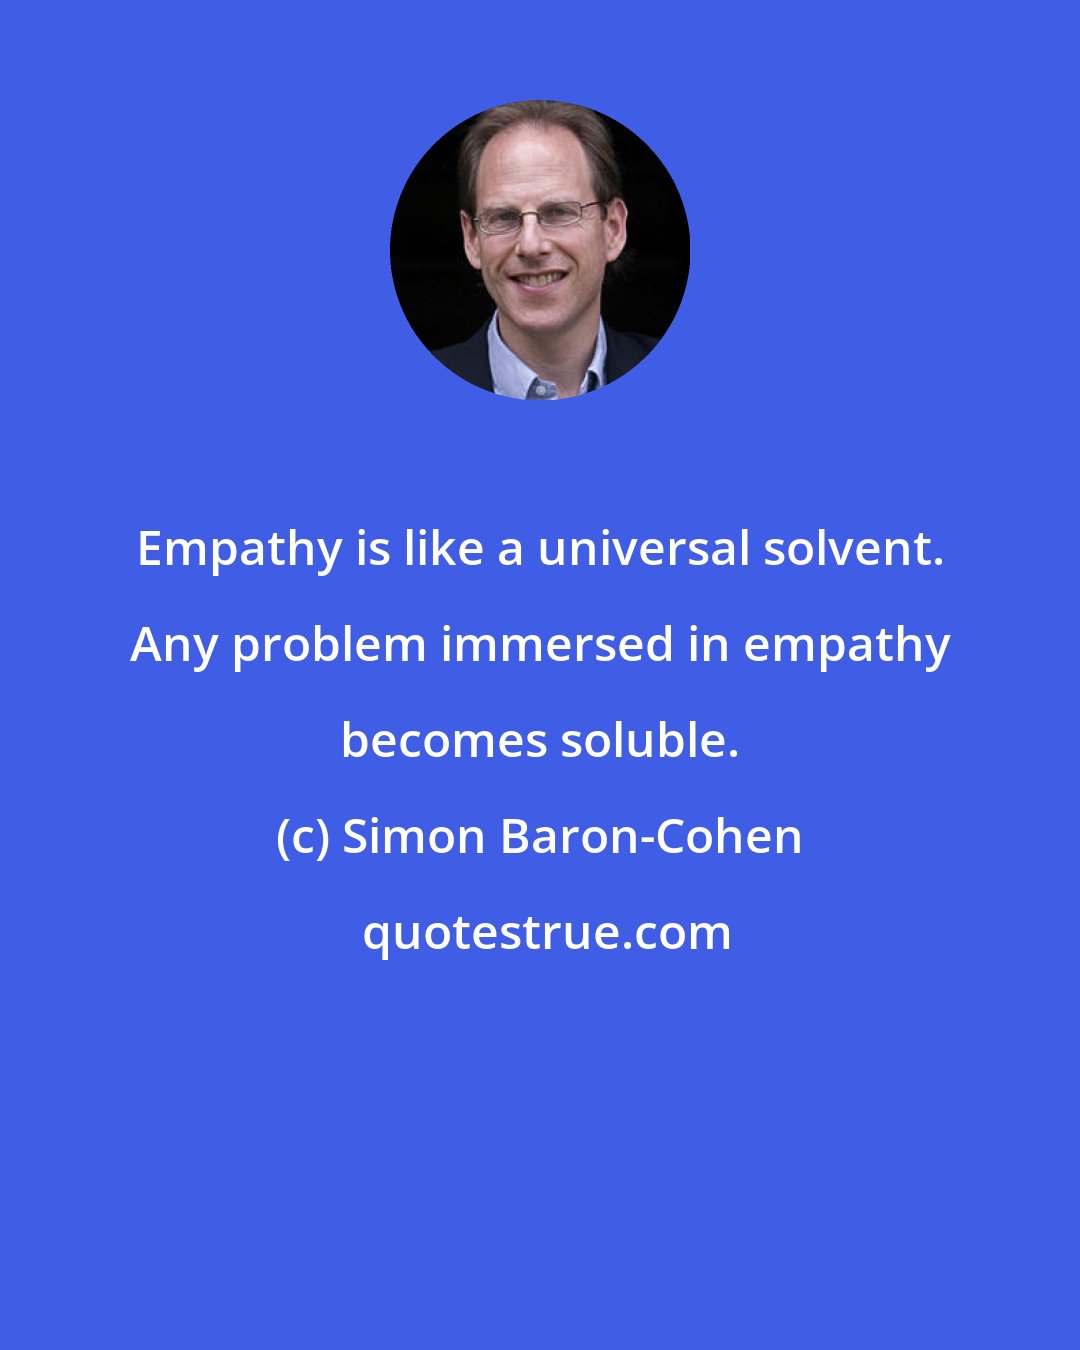 Simon Baron-Cohen: Empathy is like a universal solvent. Any problem immersed in empathy becomes soluble.